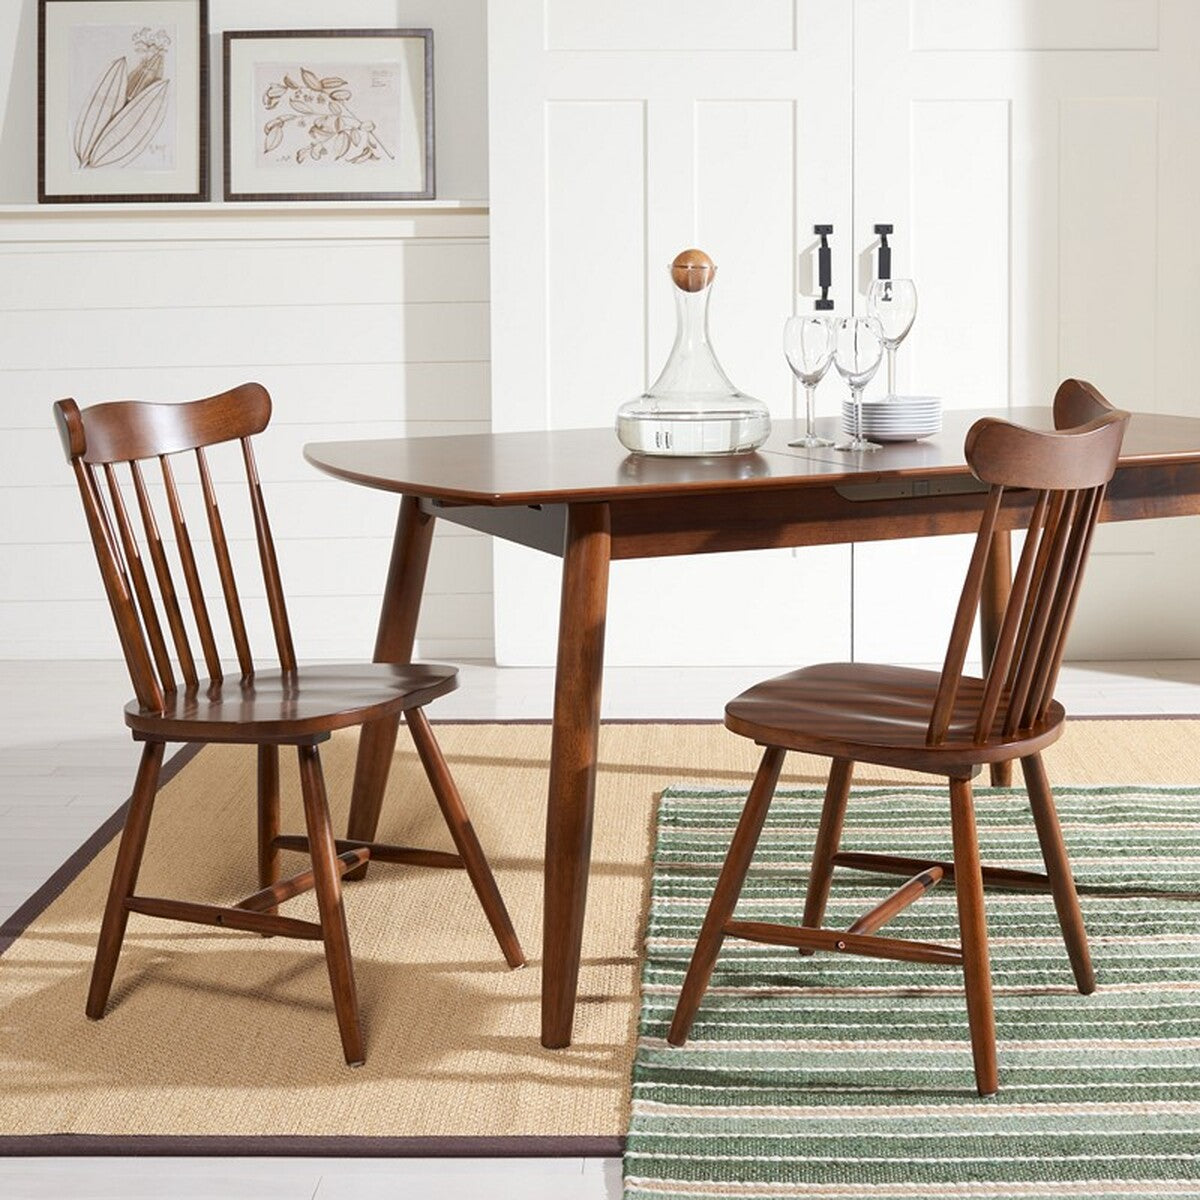 Safavieh Reeves Dining Chair, DCH1400 - Walnut (Set of 2)